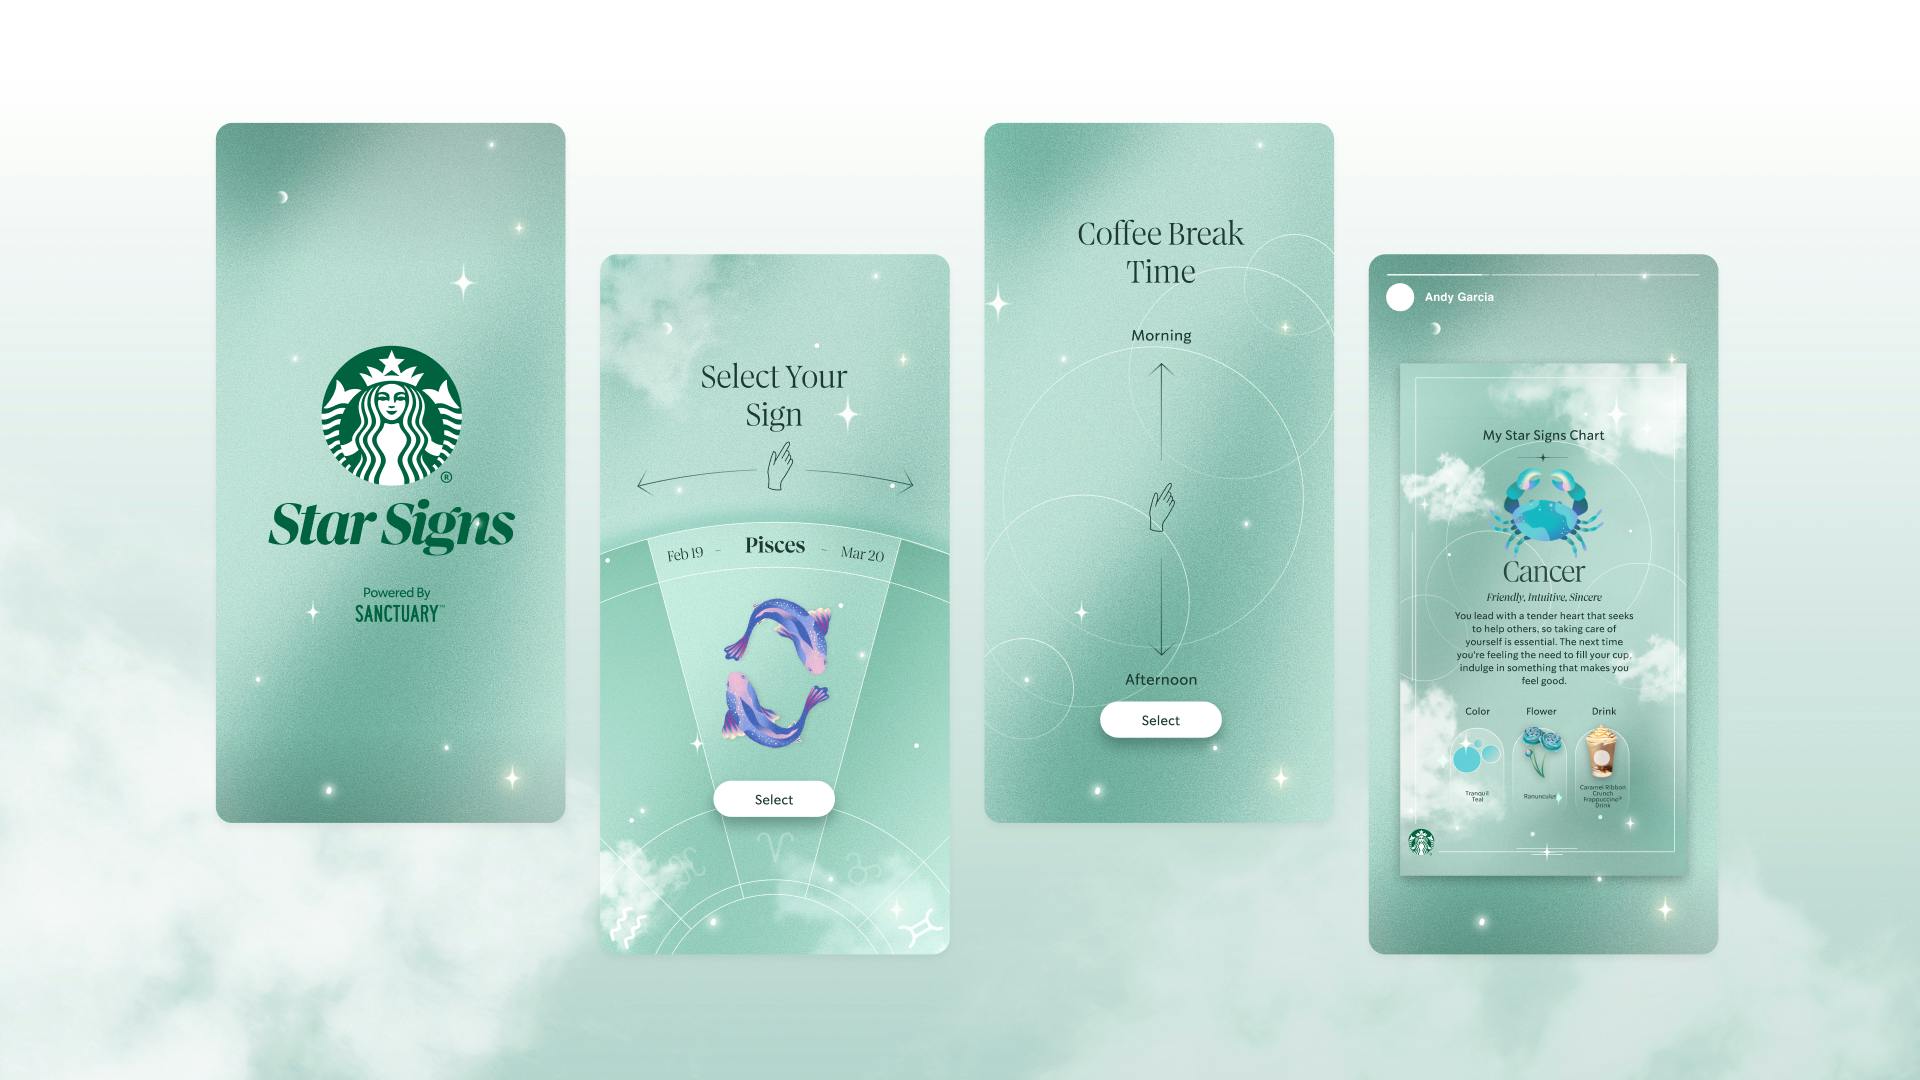 Starbucks star signs tells you your horoscope in app with design, UI and UX created by Thinkingbox for Starbucks coffee. Help determine which Starbucks beverage you should try based on your zodiac.